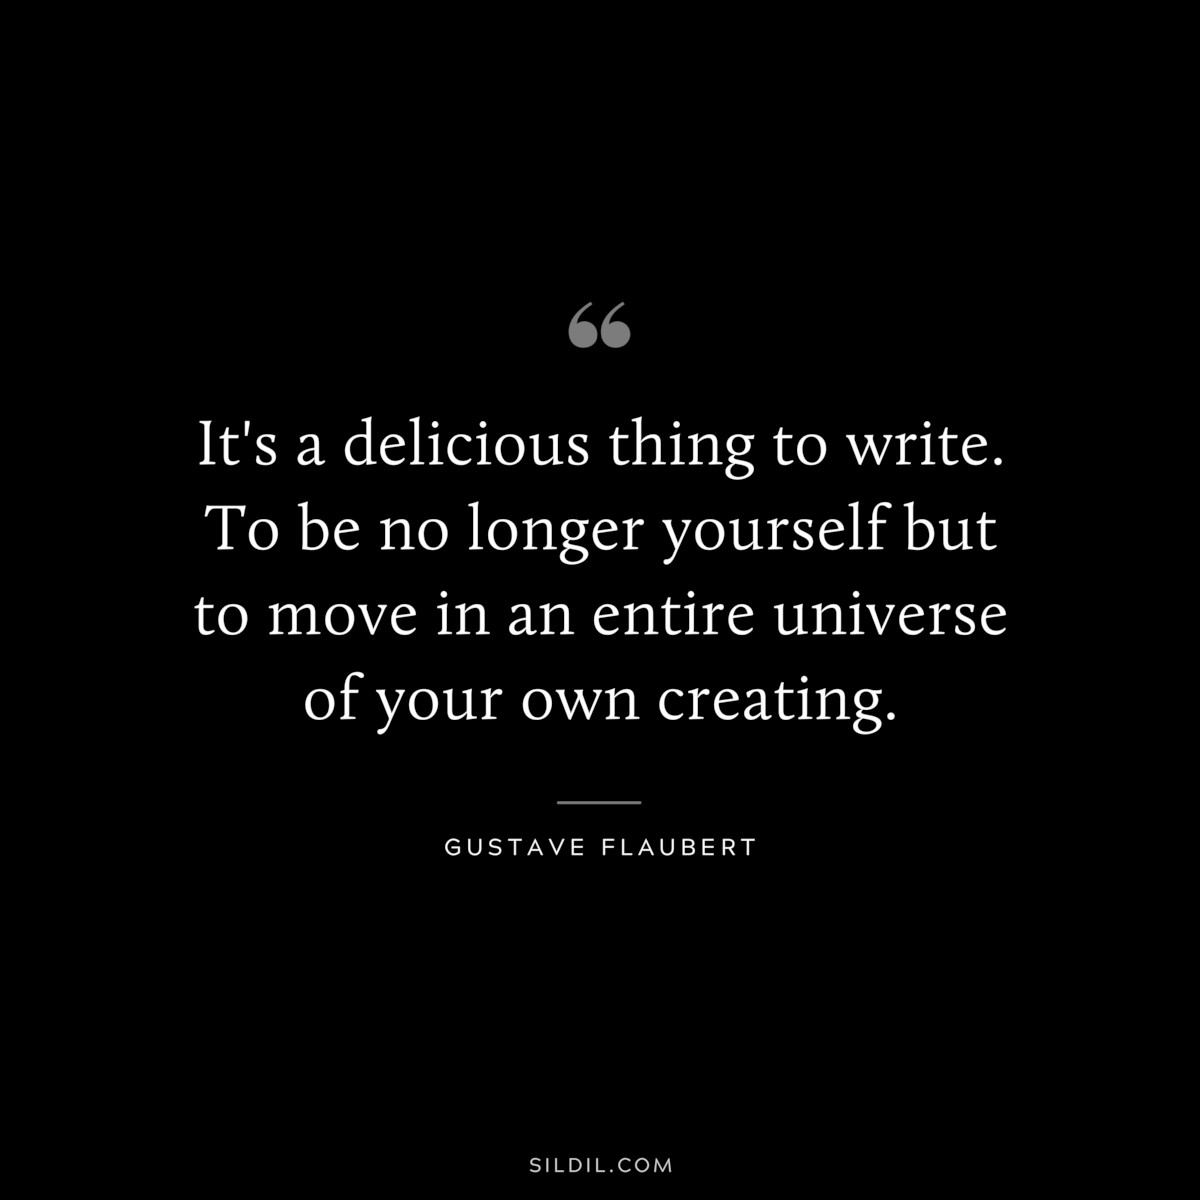 It's a delicious thing to write. To be no longer yourself but to move in an entire universe of your own creating. ― Gustave Flaubert